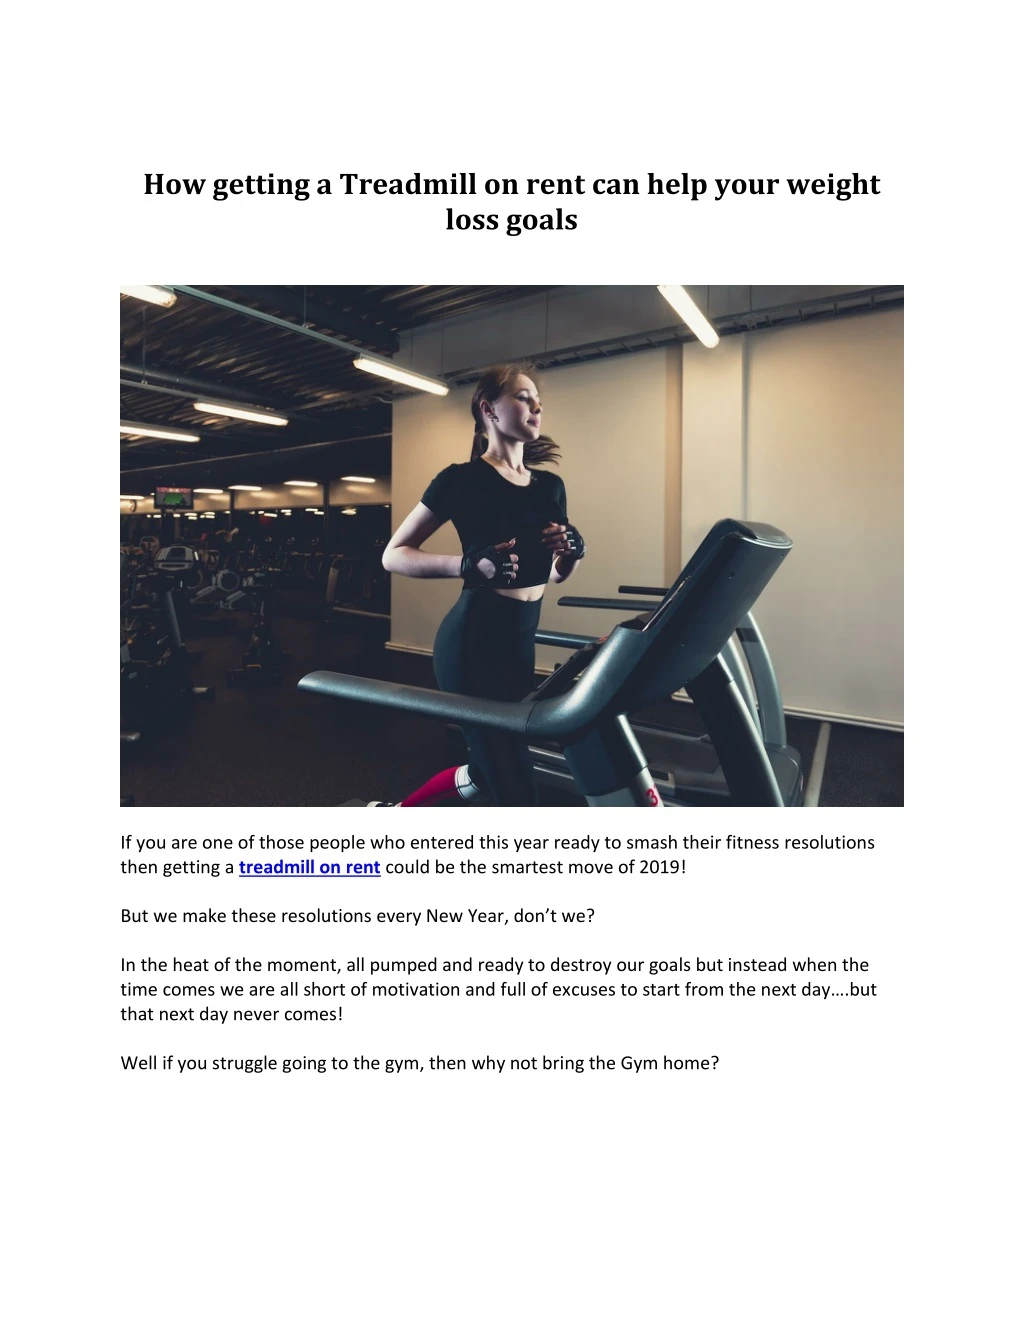 how getting a treadmill on rent can help your